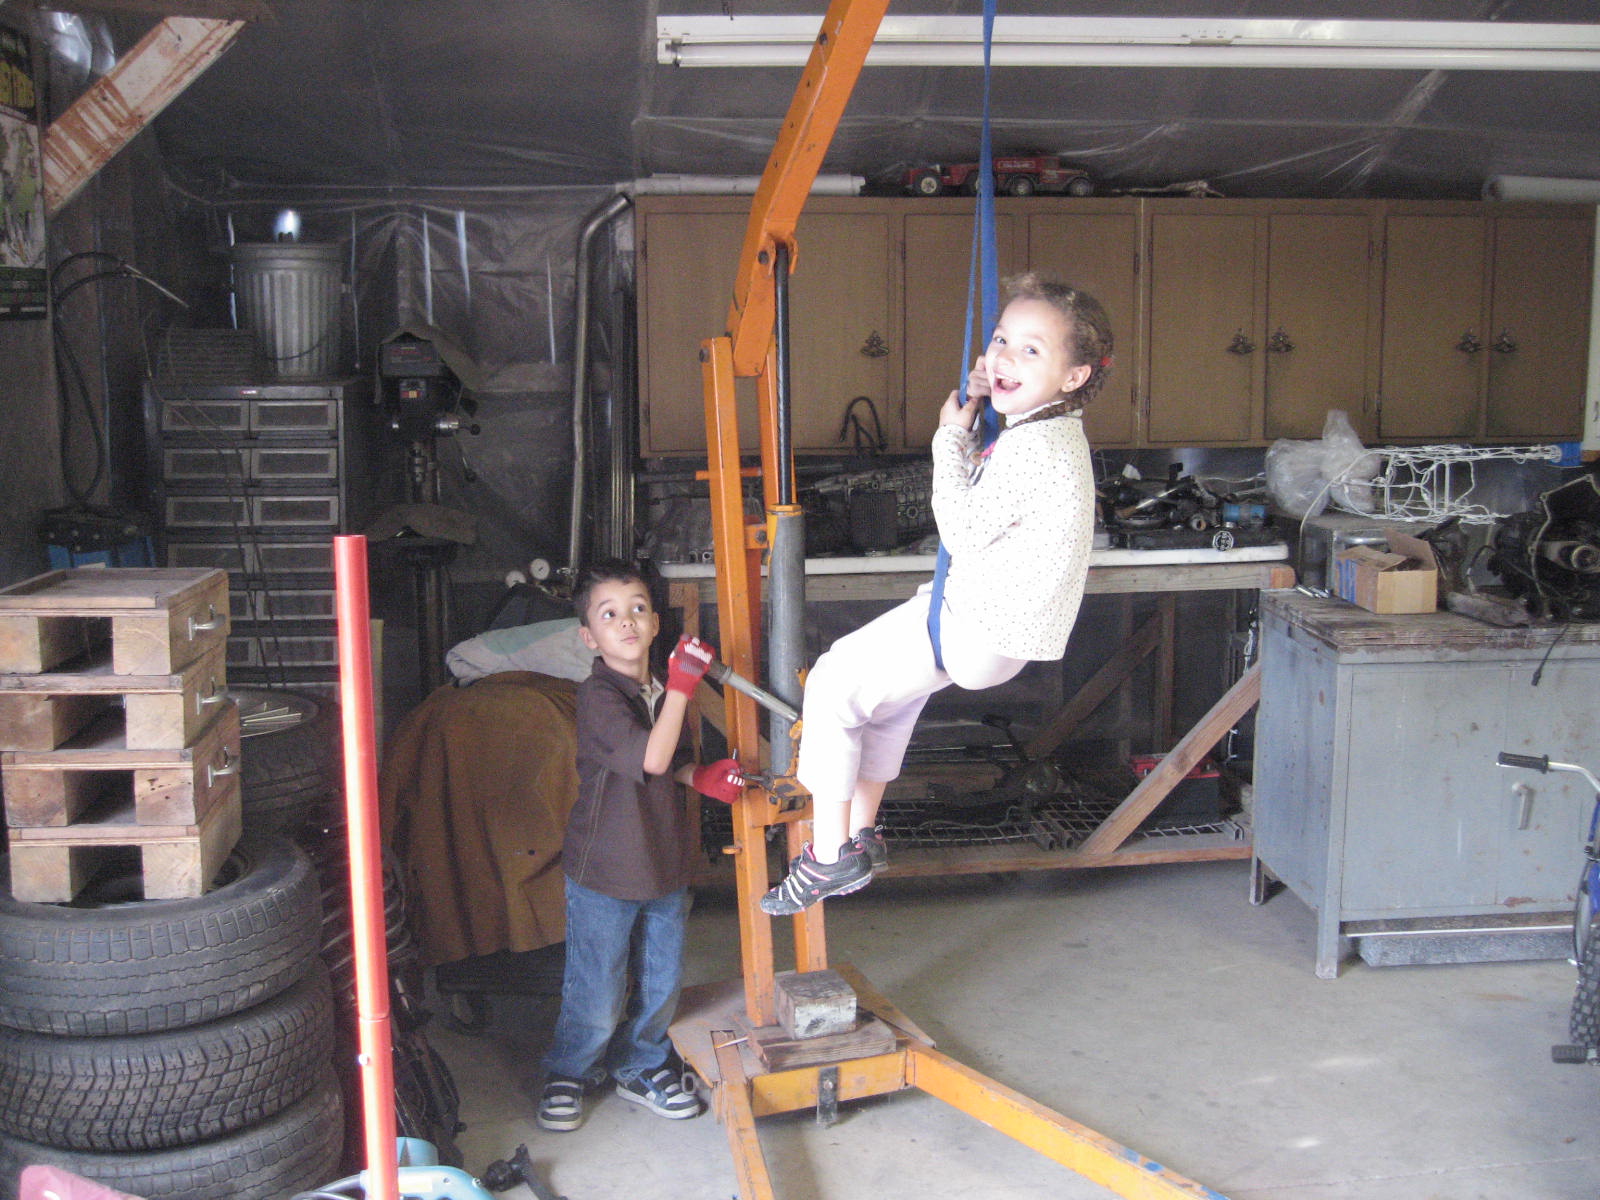 Playing on the engine hoist